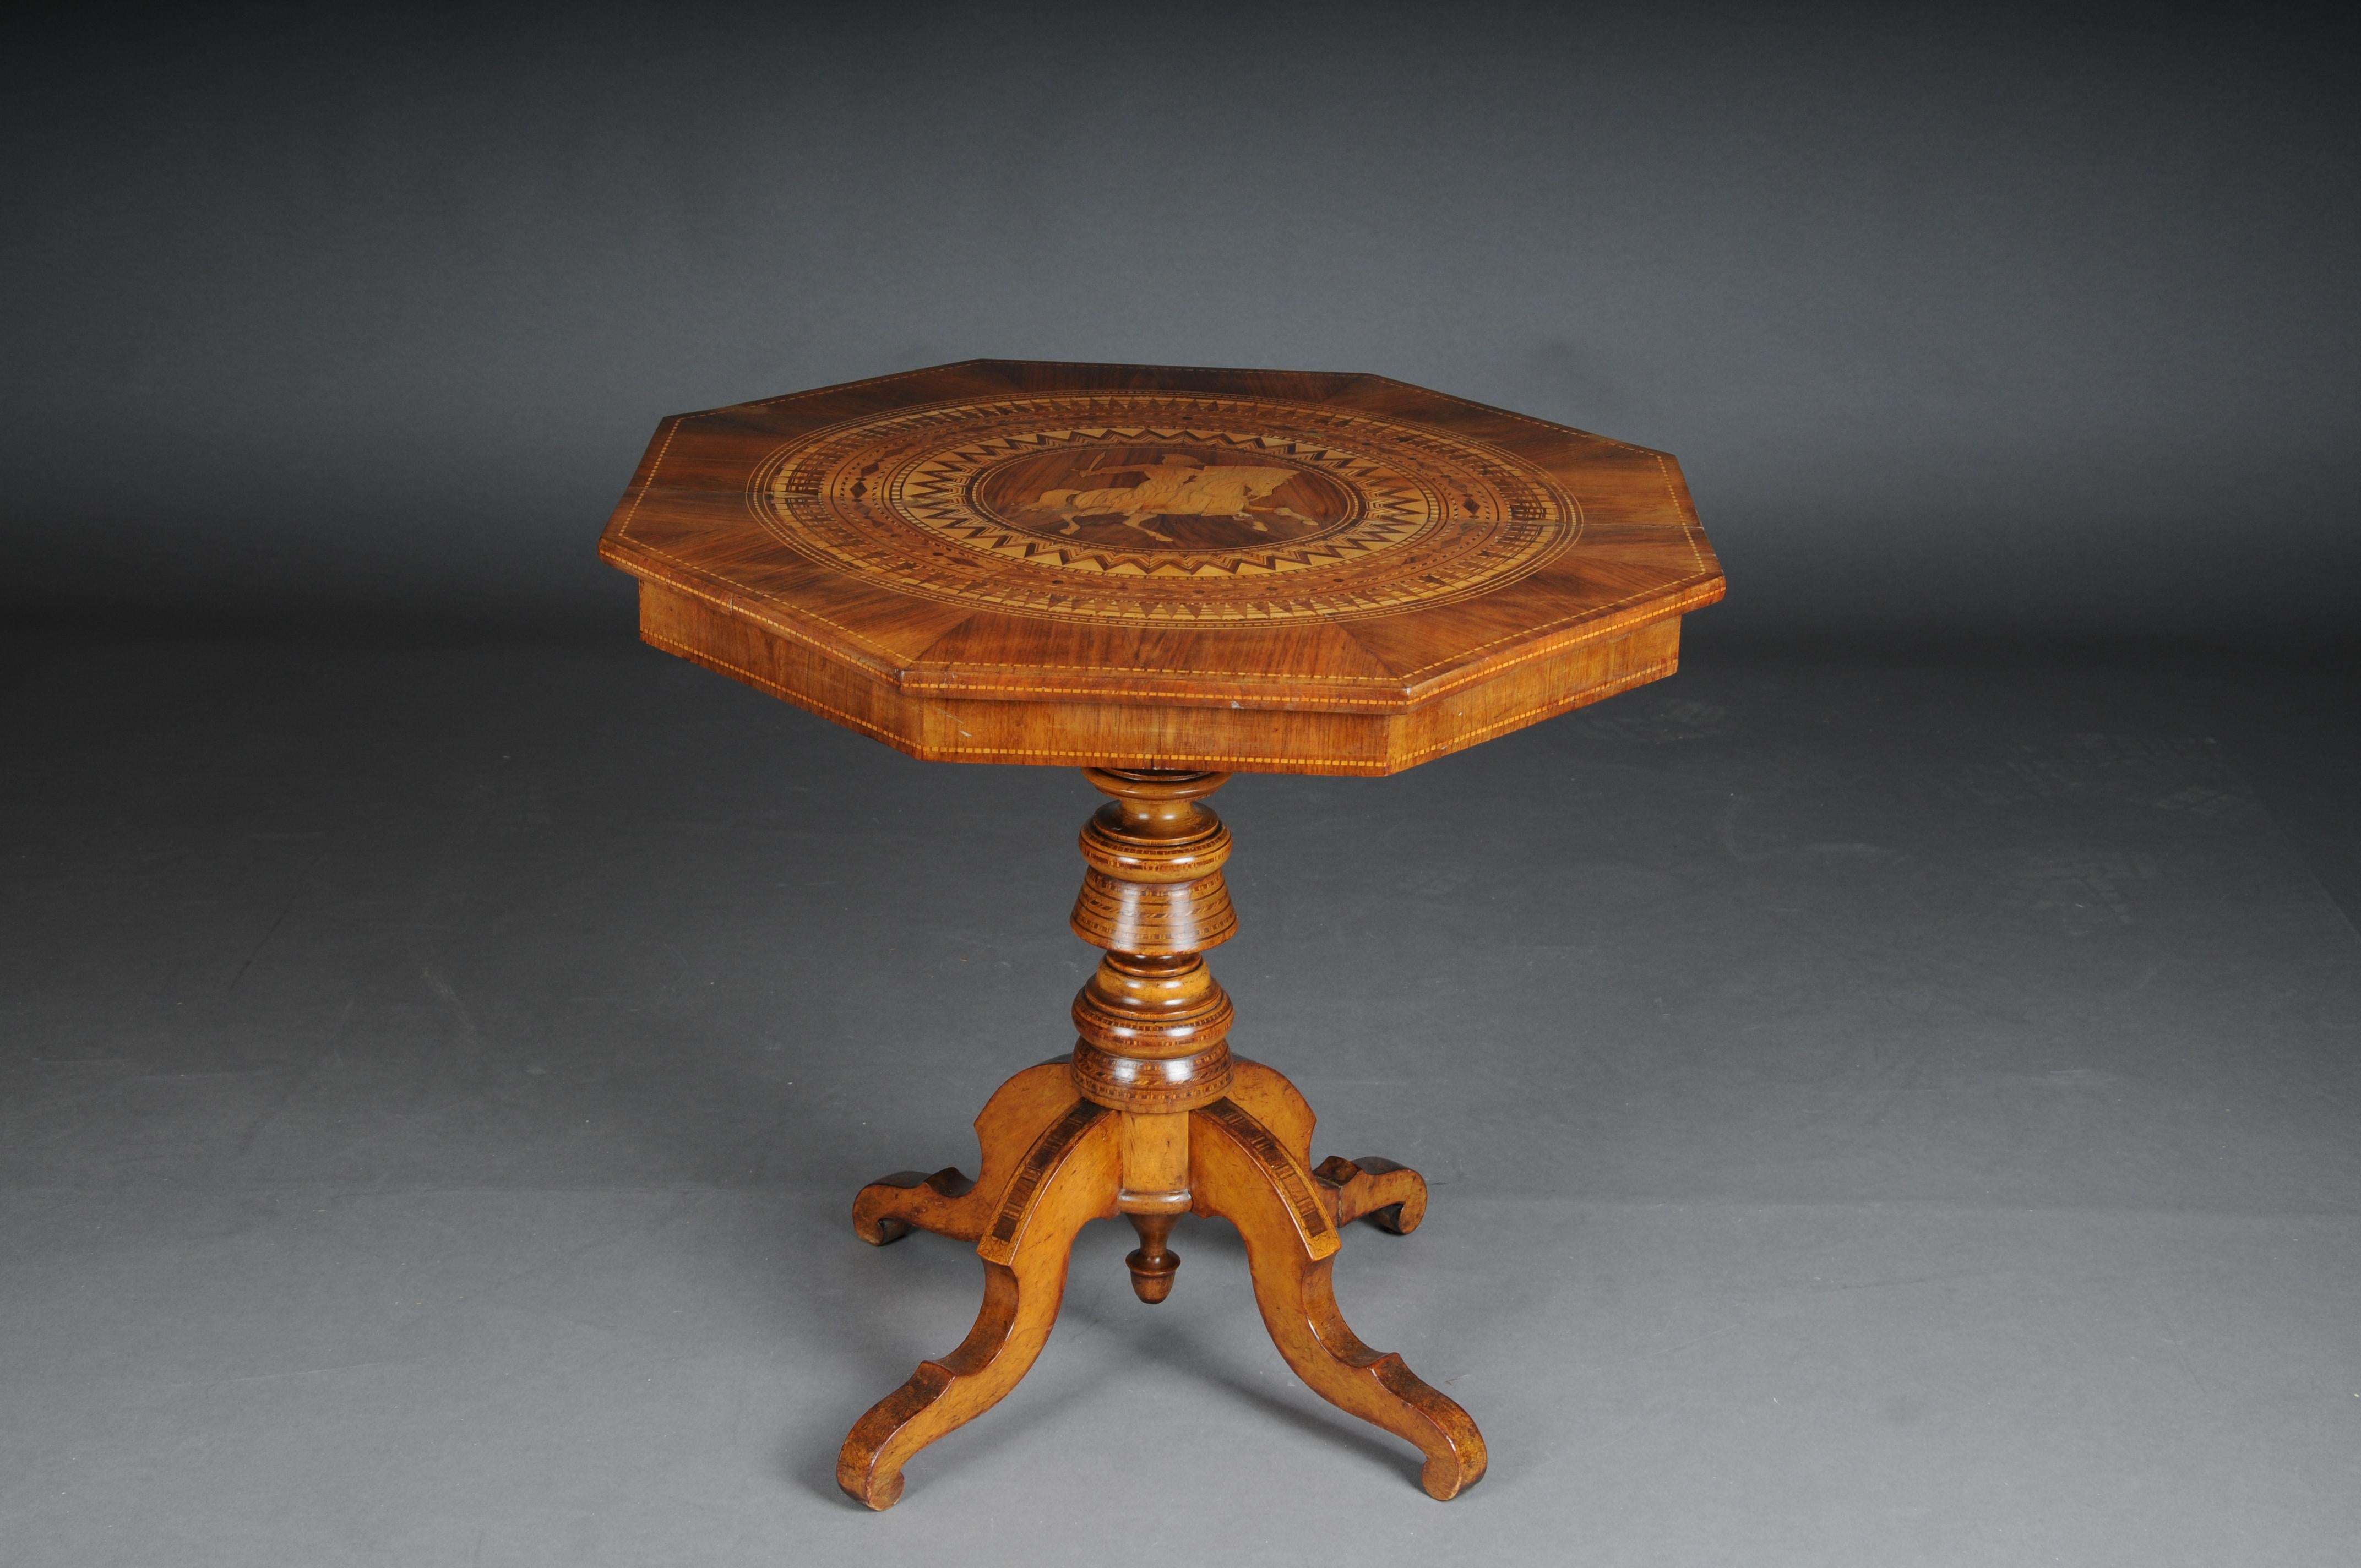 Antique inlaid baroque side table 19th century.

Solid wood body with walnut veneer. Rich marquetry on octagonal cover plate. In the middle a knightly rider on horseback. Turned and inlaid shaft connected to four long curved legs. Germany mid 19th